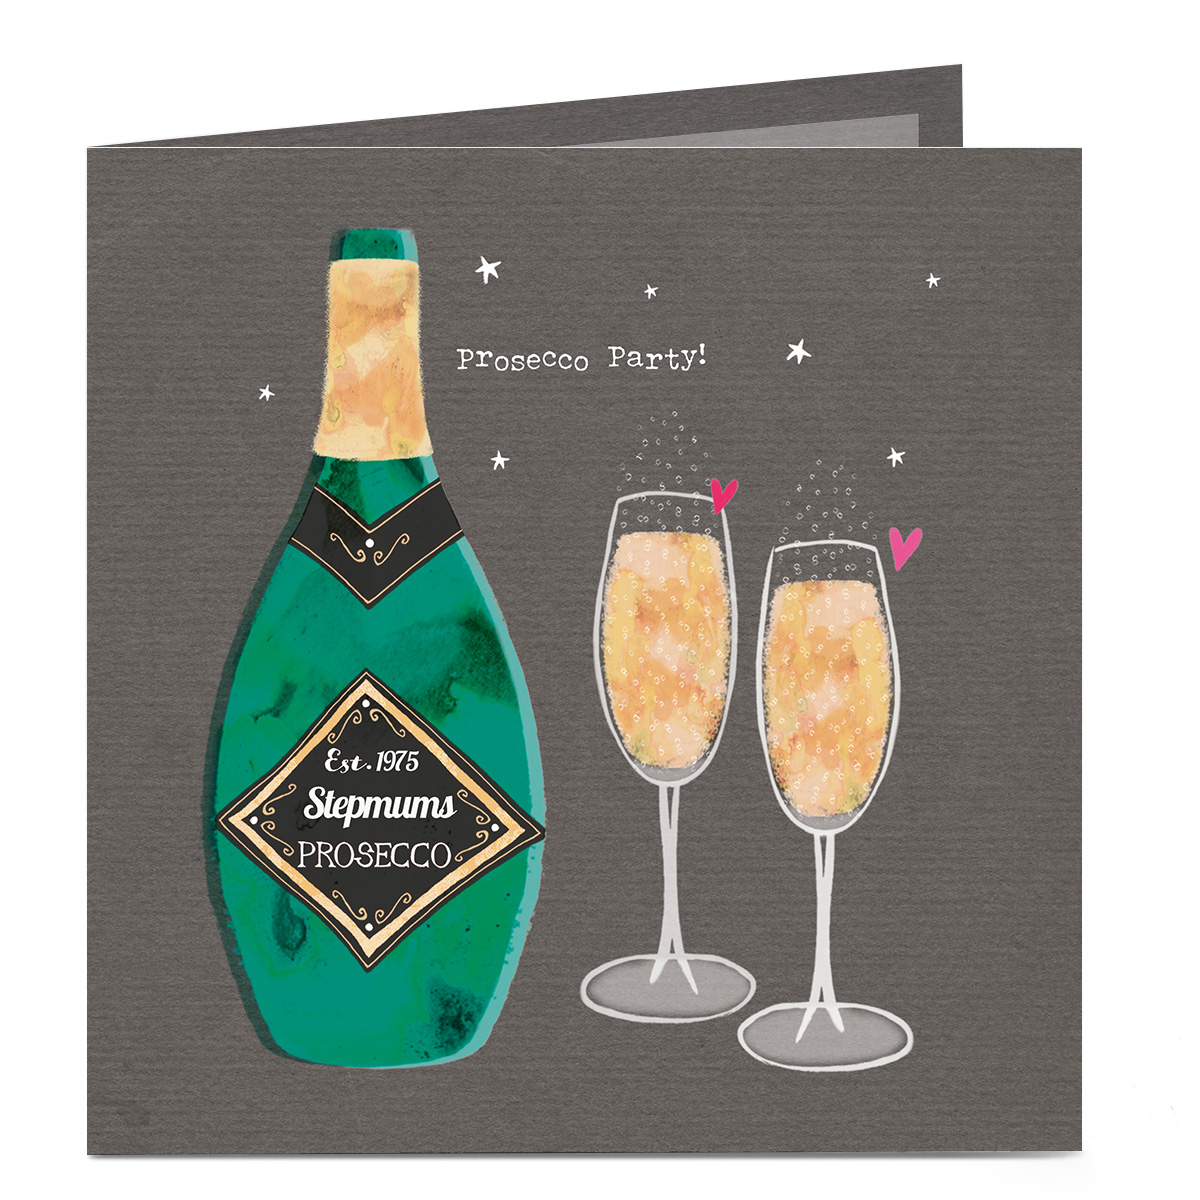 Personalised Birthday Card - Stepmum's Prosecco Party